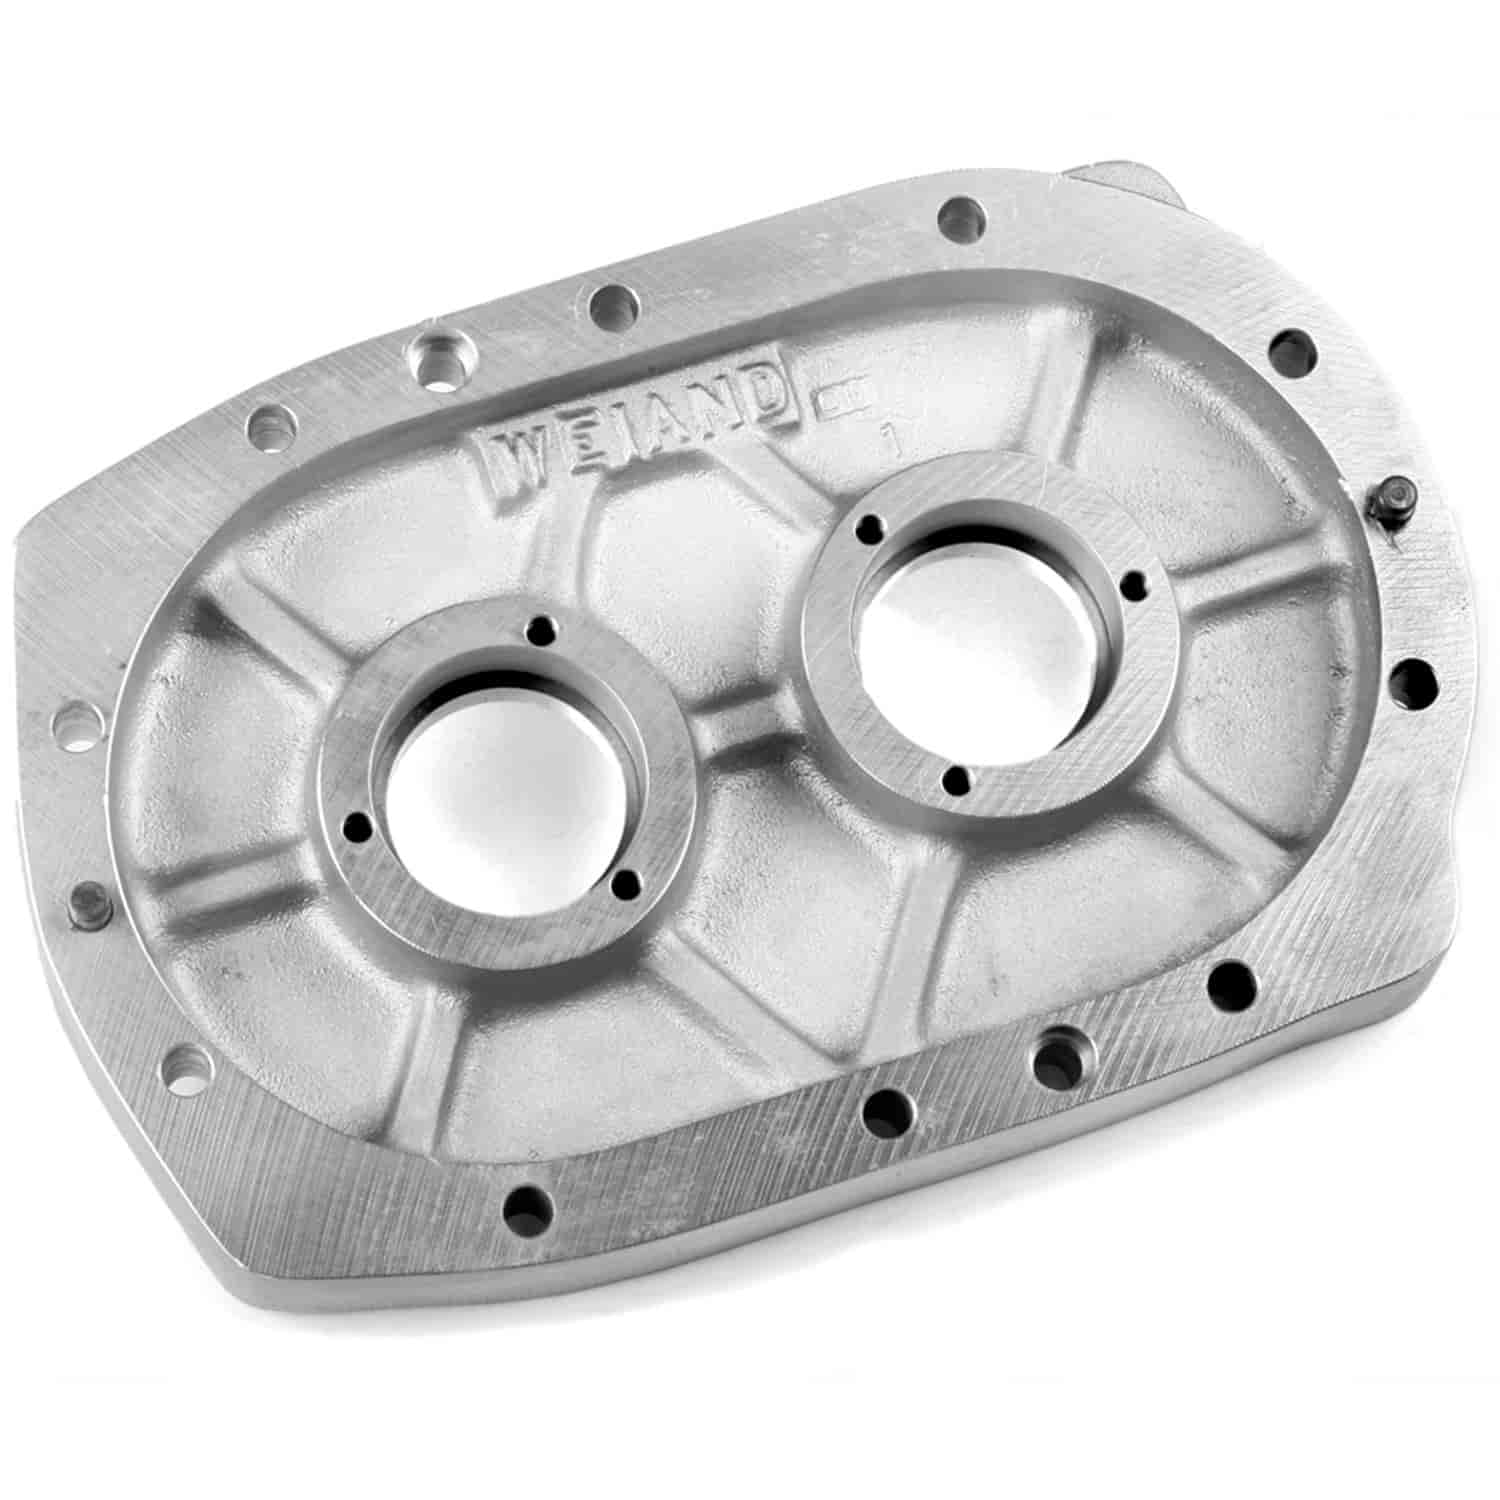 6-71/8-71 Supercharger Front Bearing Plate